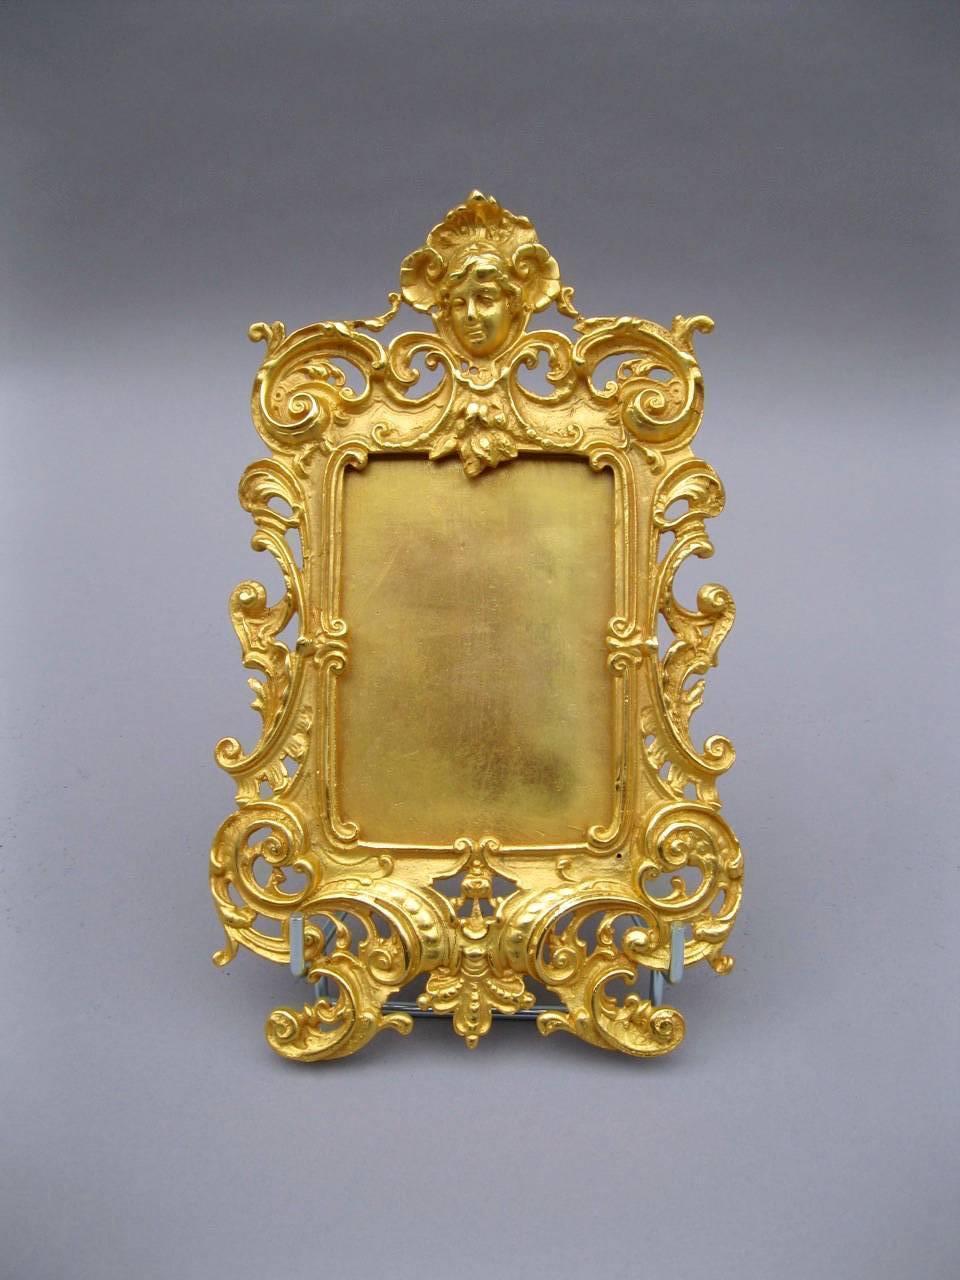 Louis XV style photo frame in gilt bronze adorned with rococo vegetal motifs, acanthus leaves, shells and scrolls.

Work realized at the end of the 19th century.

Dimensions: 30 x 18 cm.